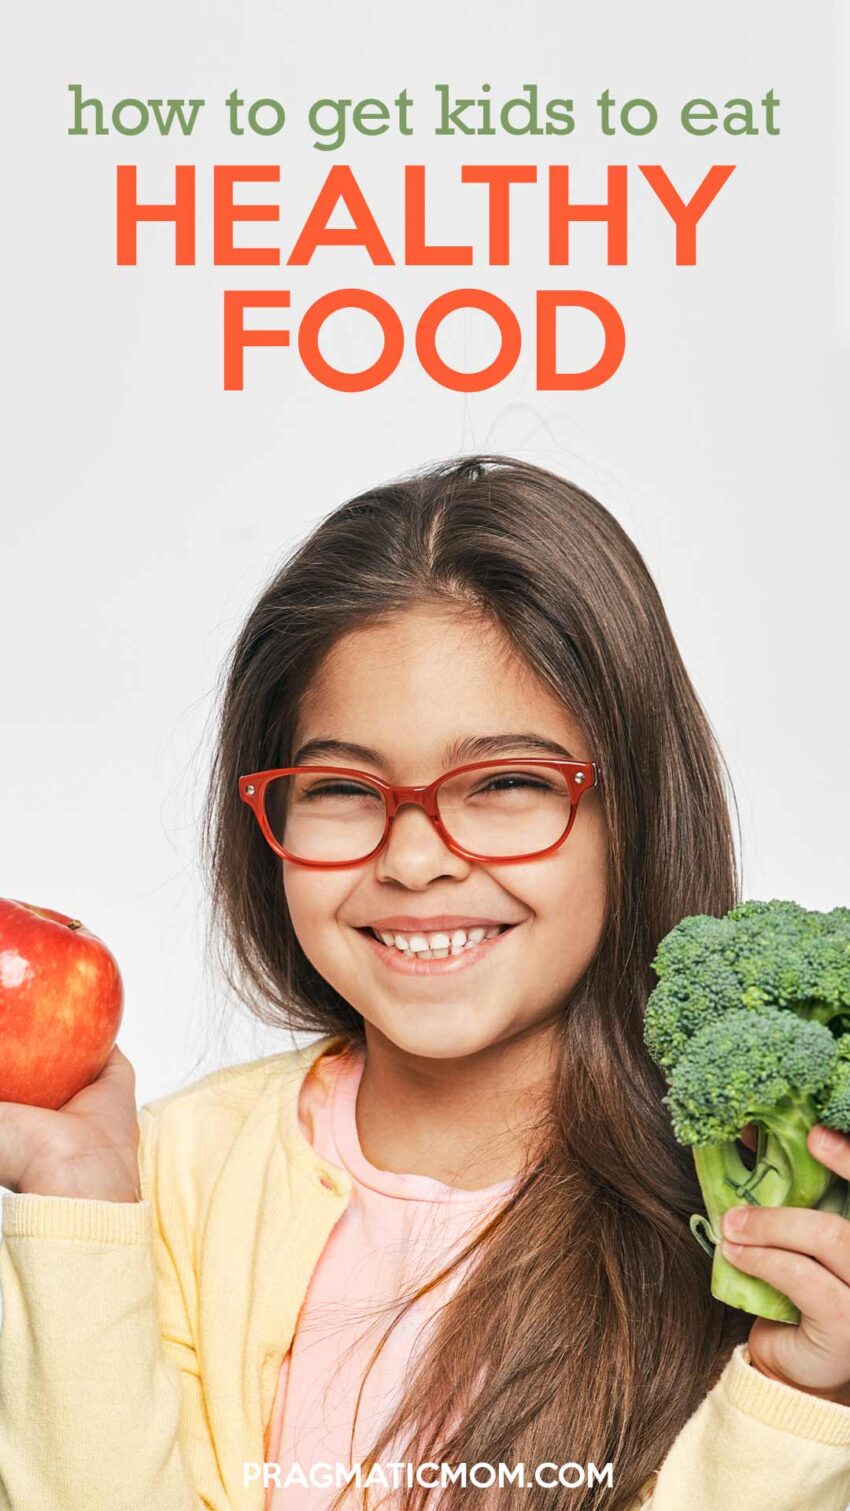 How to Get Kids to Eat Healthy Food